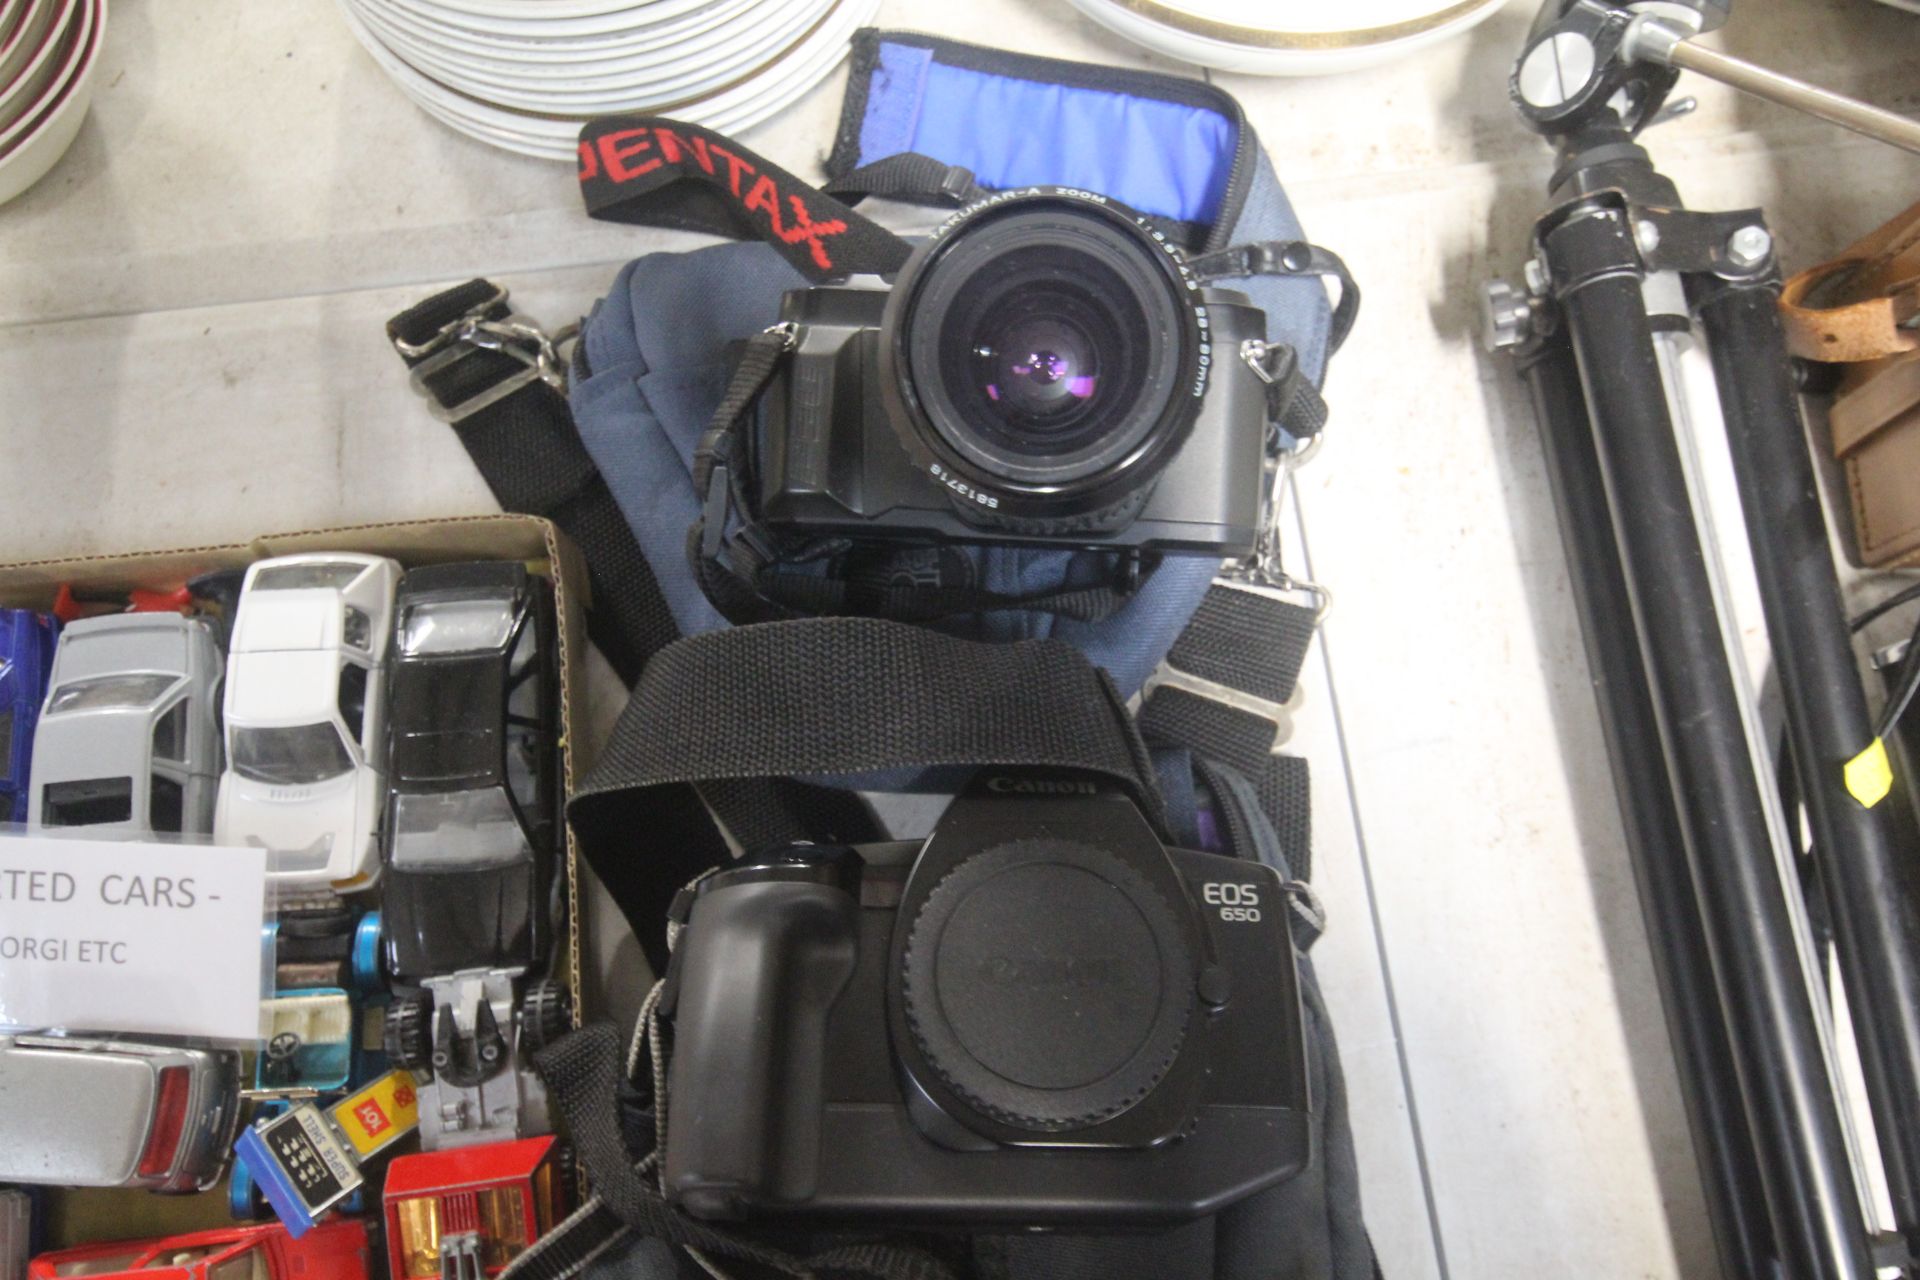 A collection of cameras to include Canon and Penta - Image 3 of 3